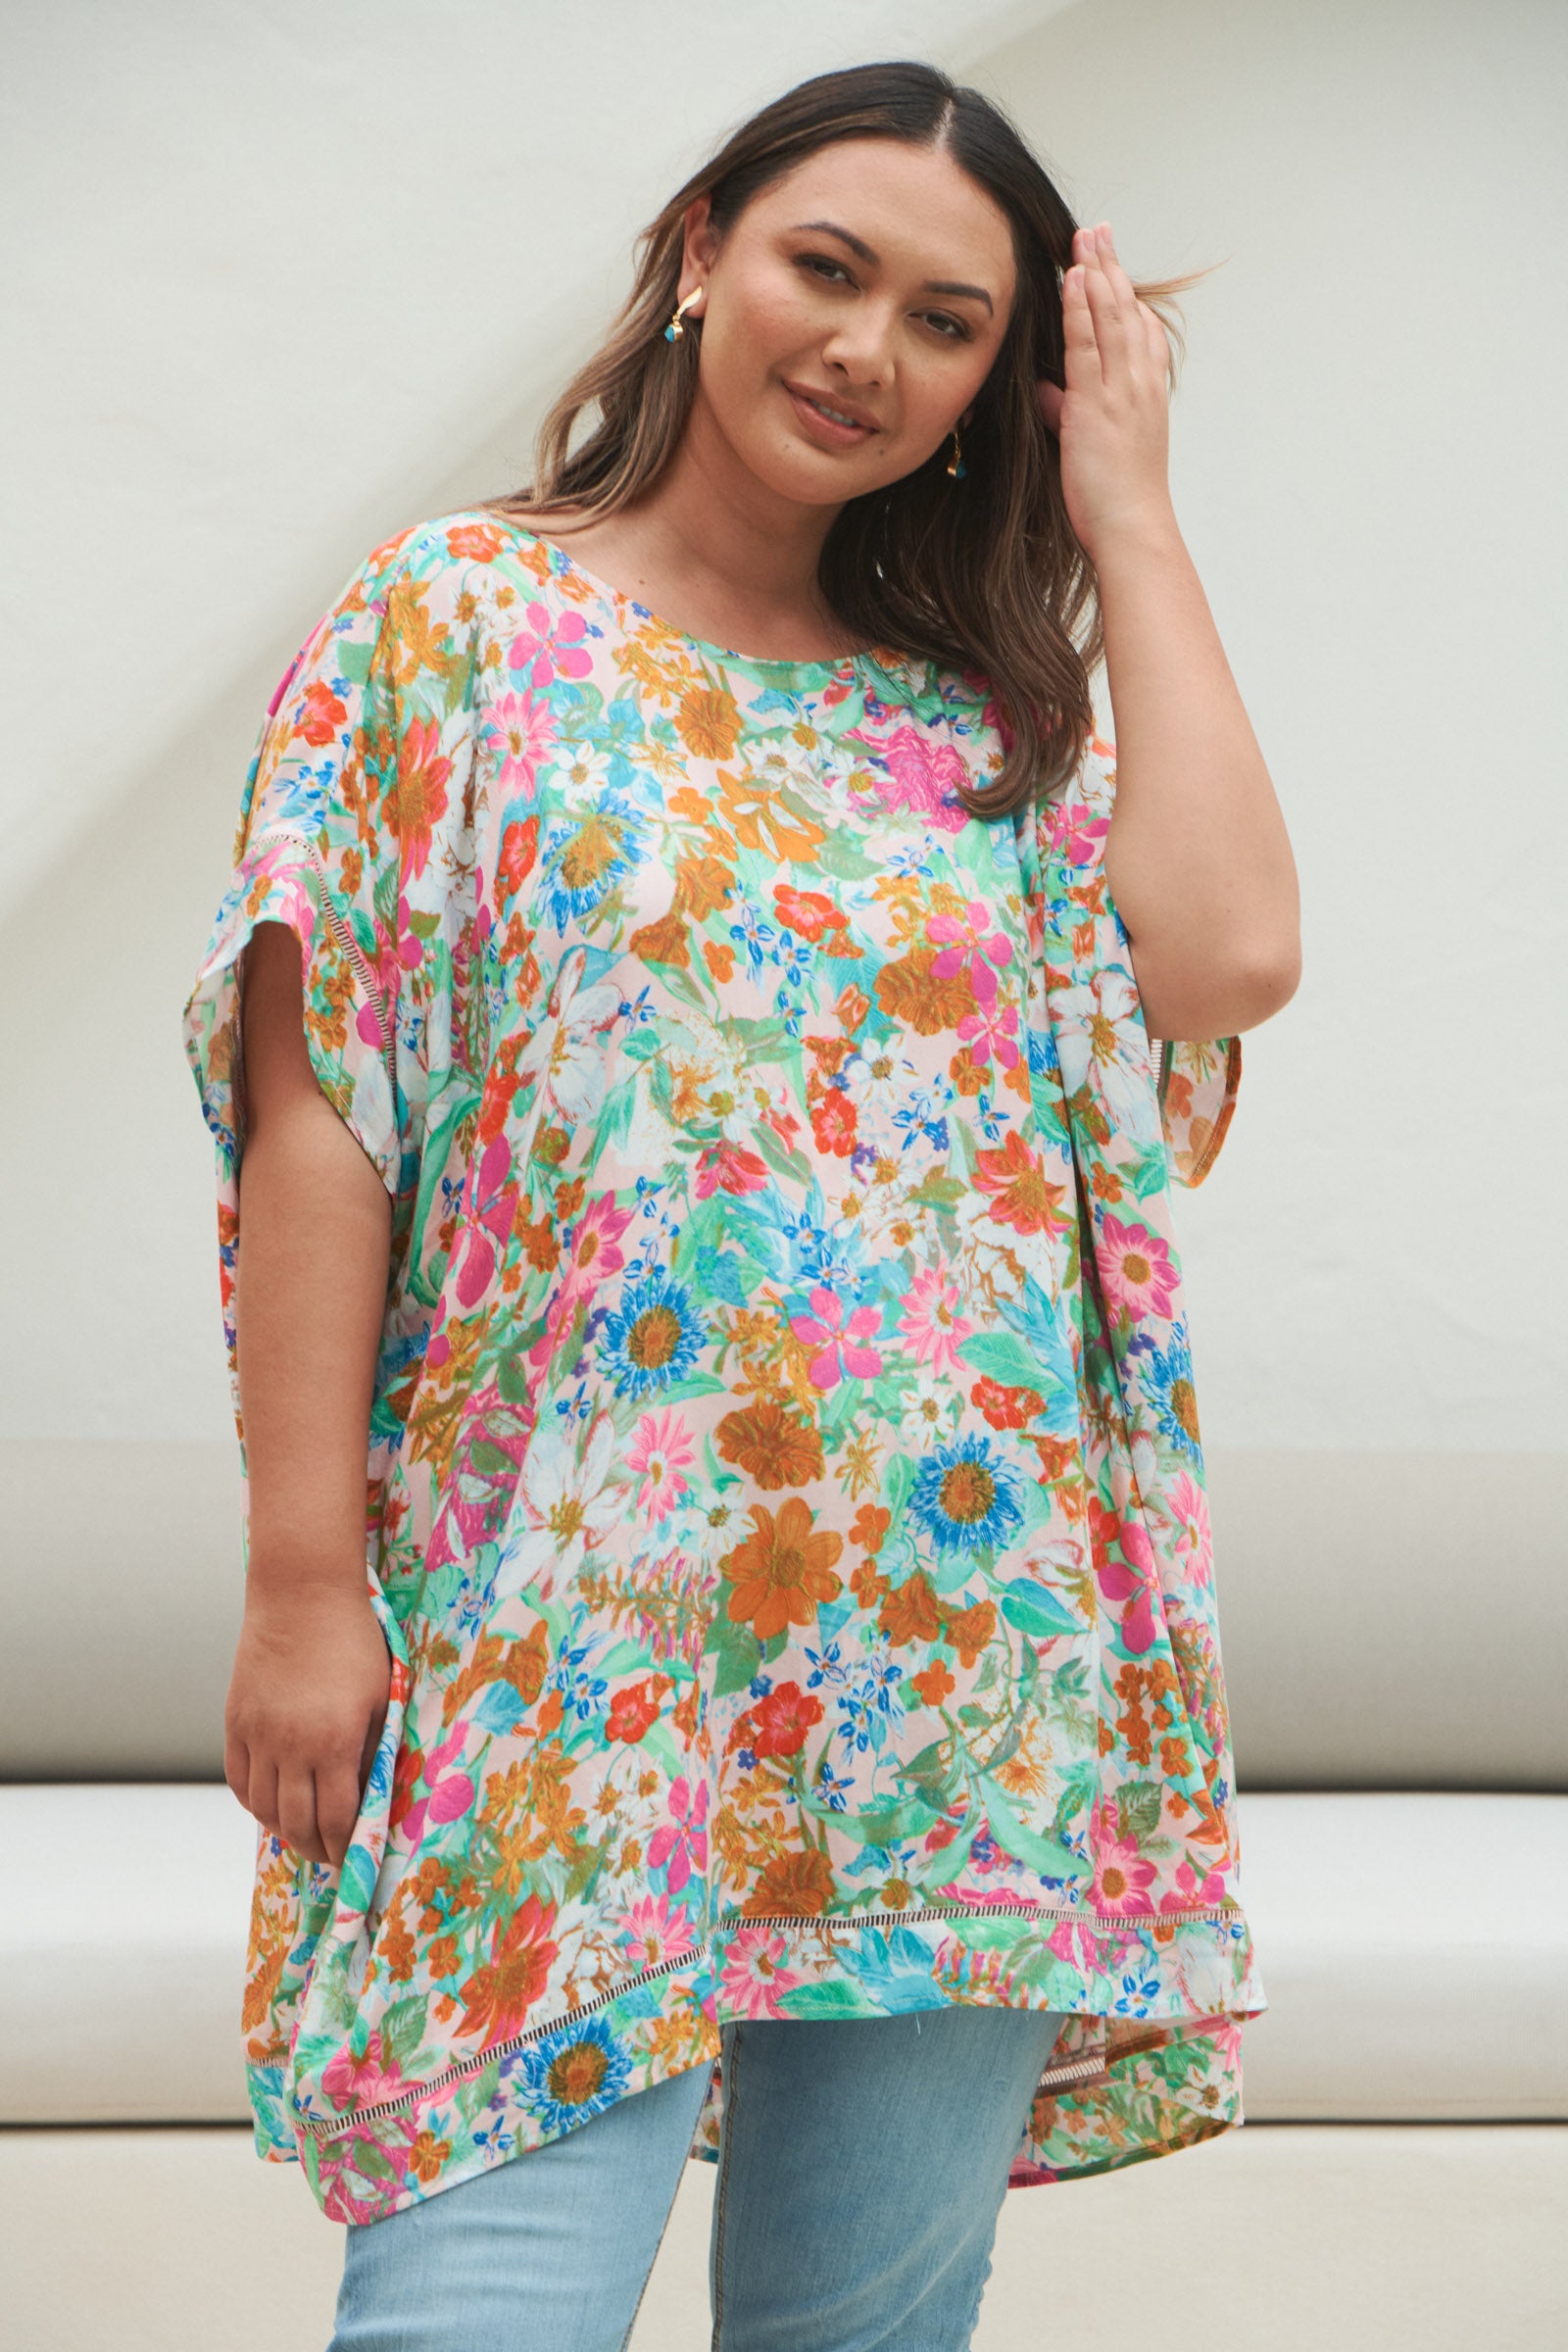 Esprit Relax Top - Pink Flourish - eb&ive Clothing - Top S/S One Size